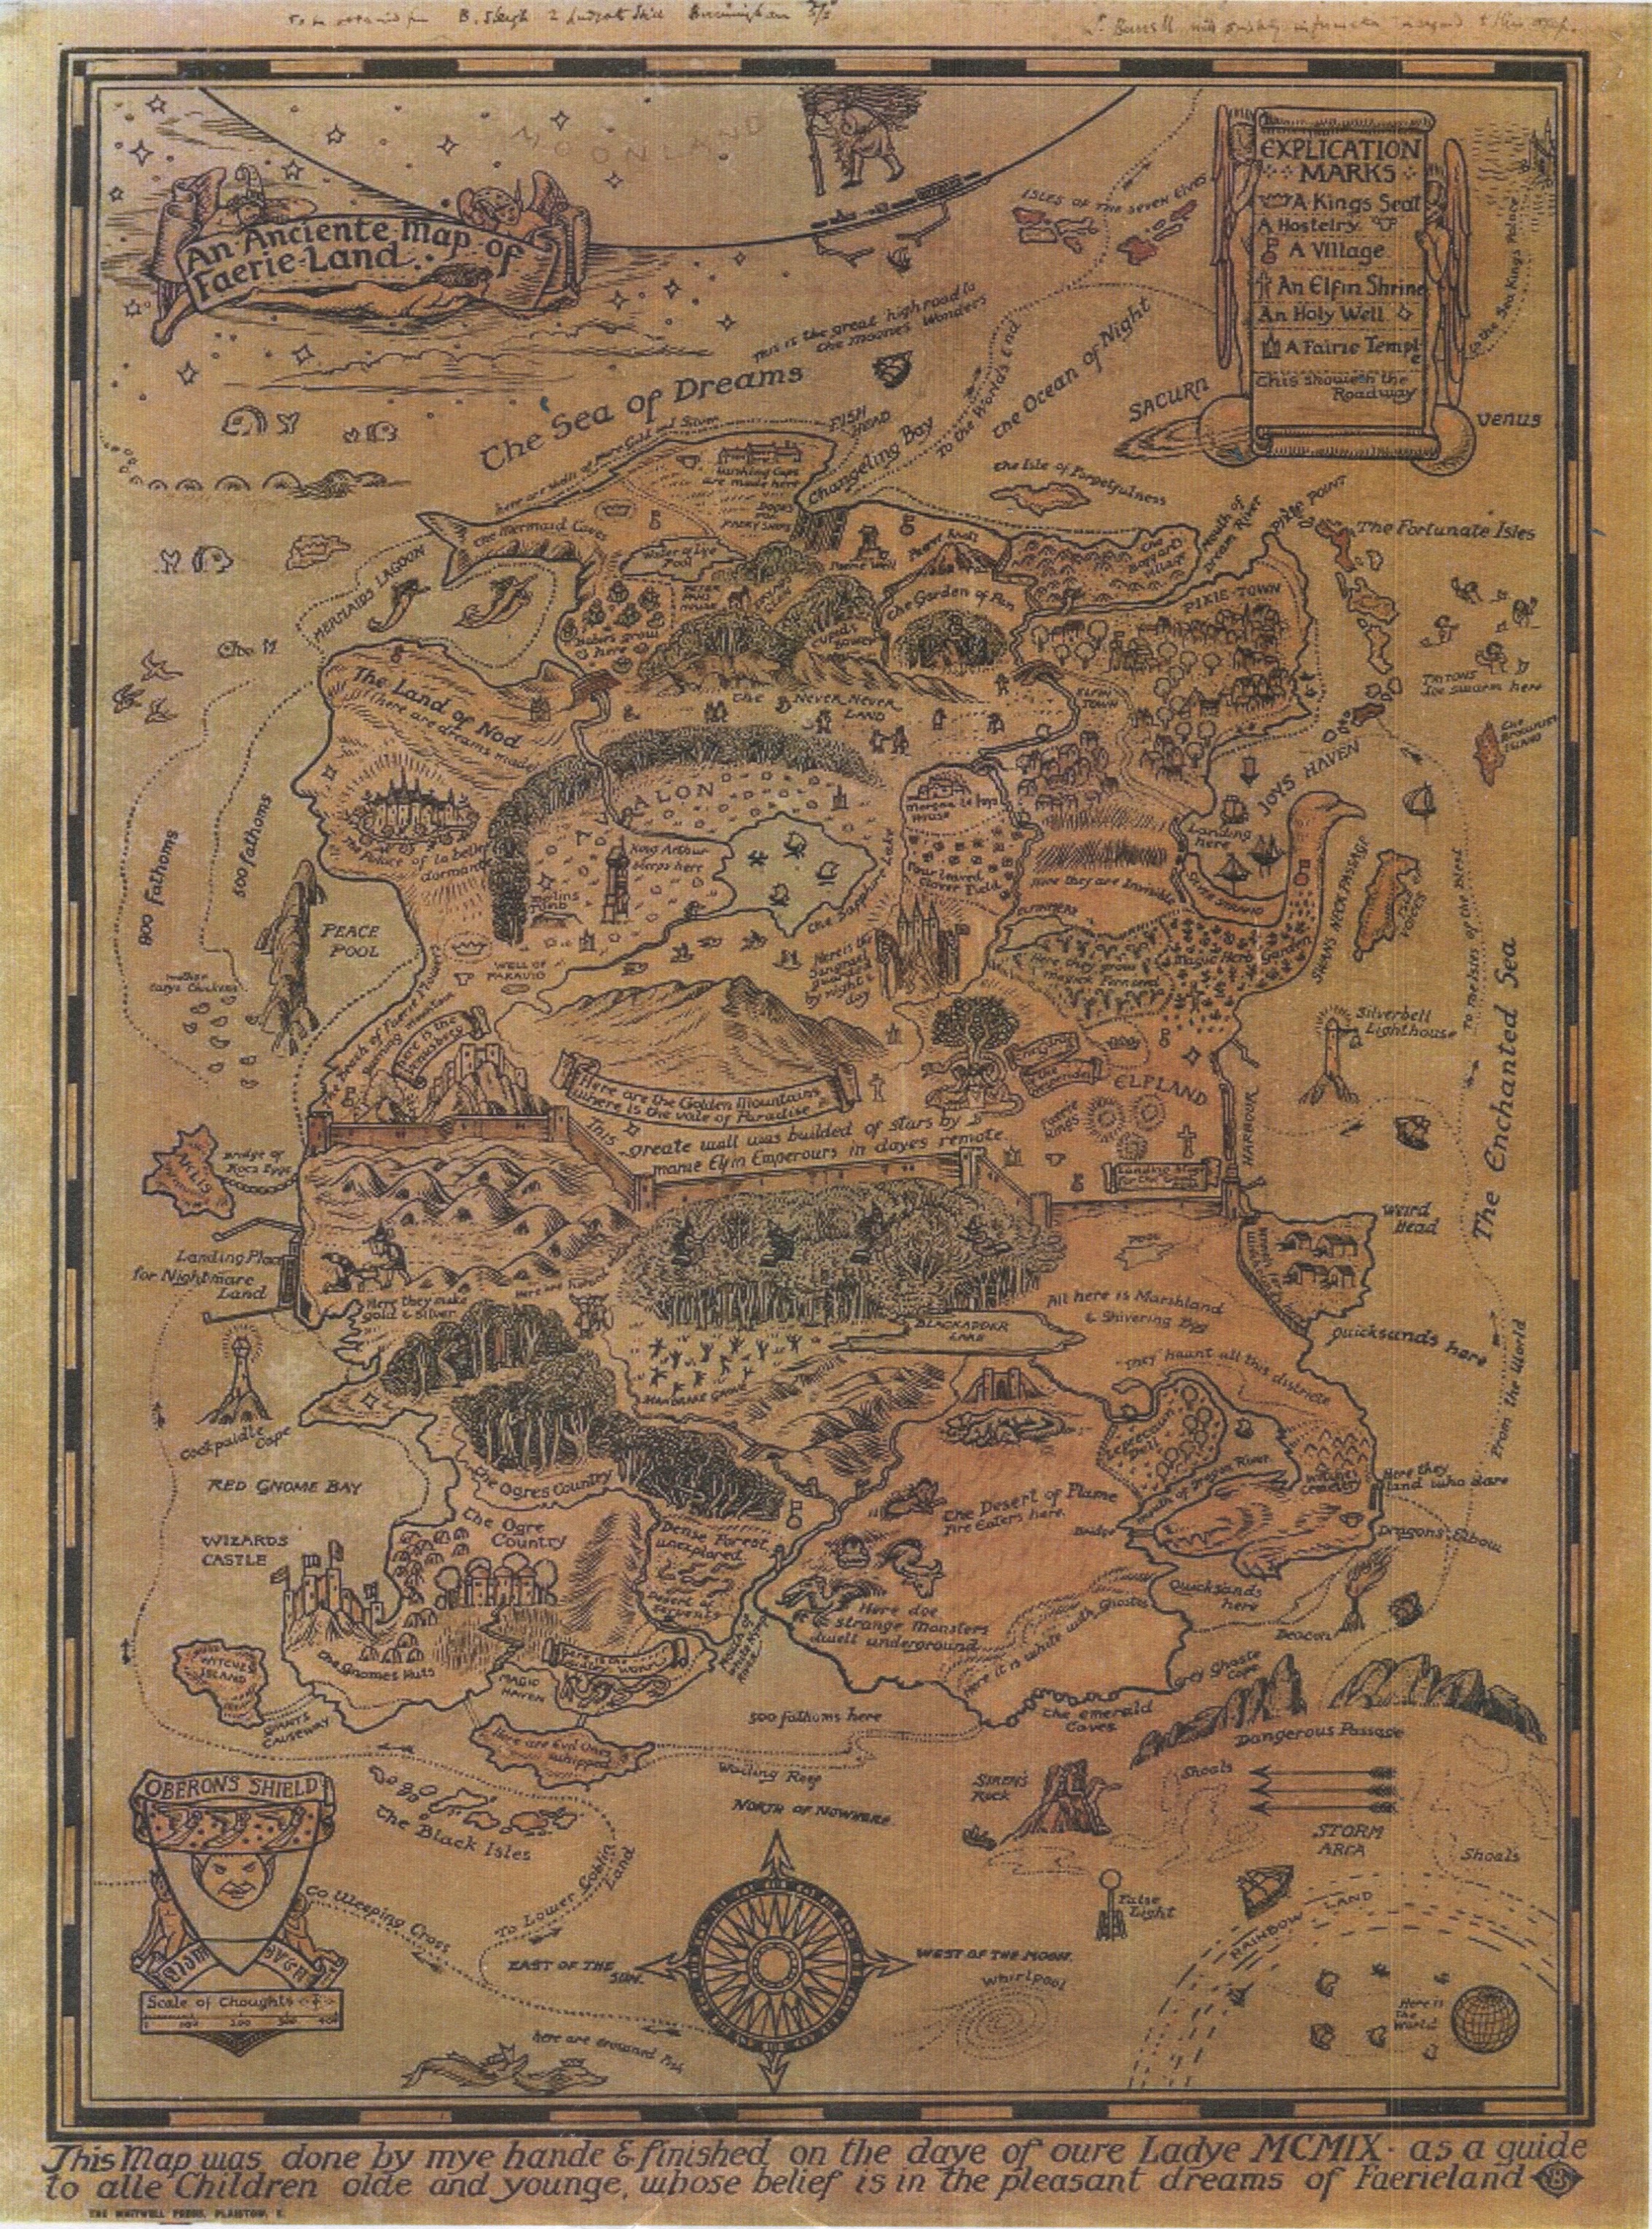 Bernard Sleigh's first draft of the Anciente Mappe of Fairyland, drawn 25 March 1909